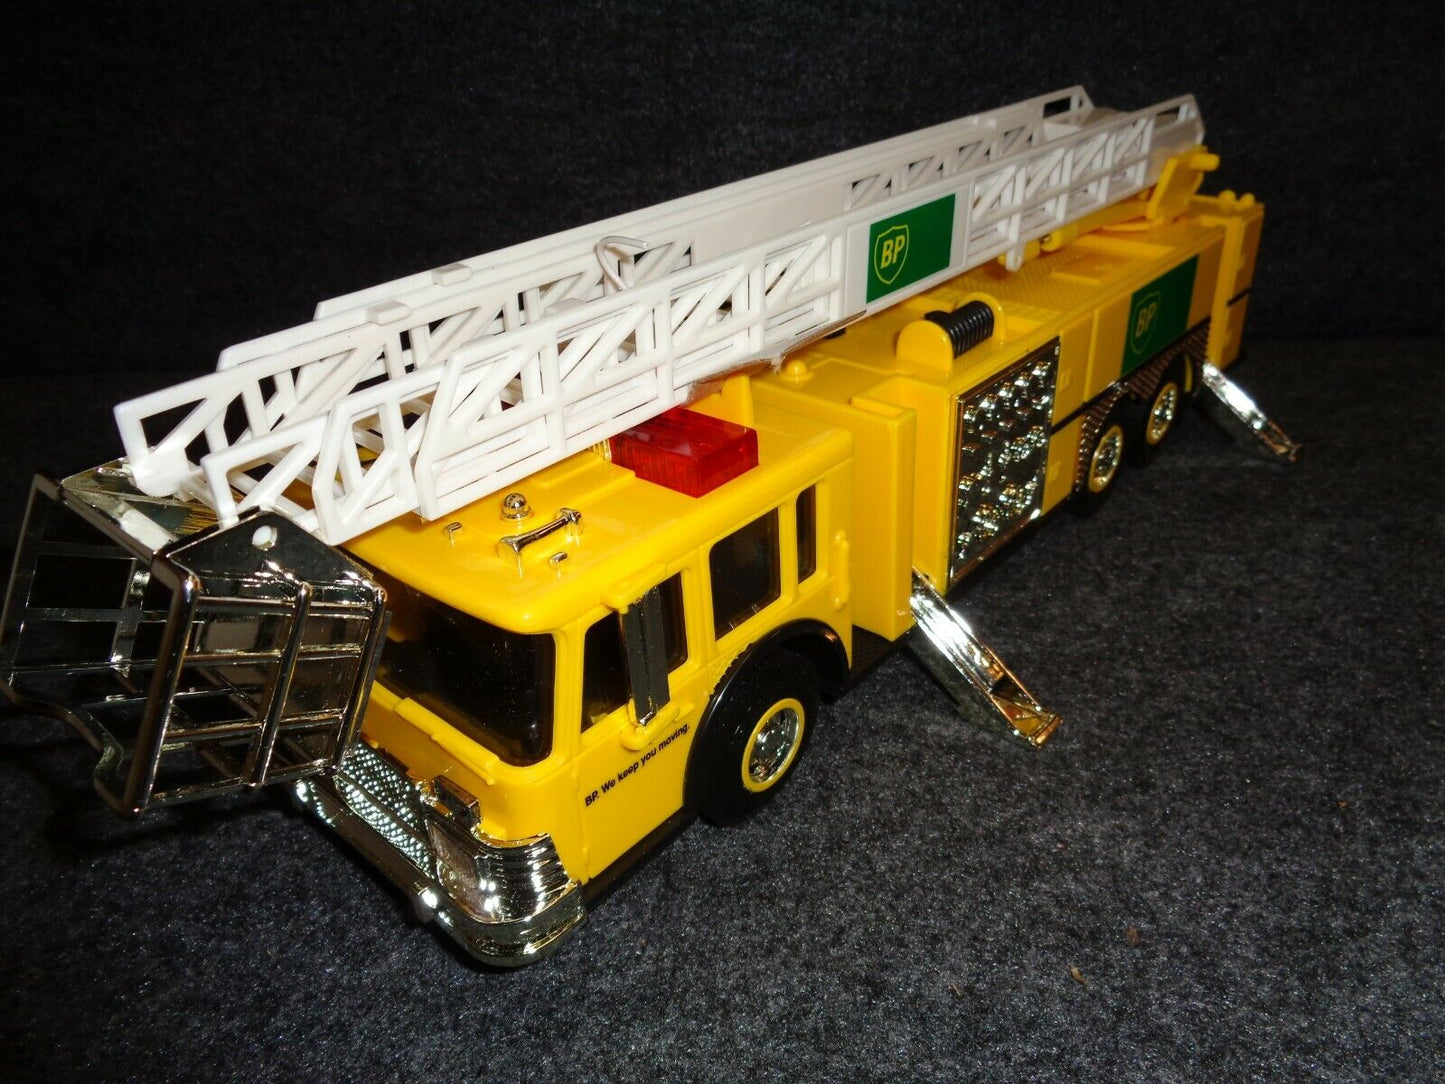 BP 1998 Toy Fire Truck - Credit Card Edition